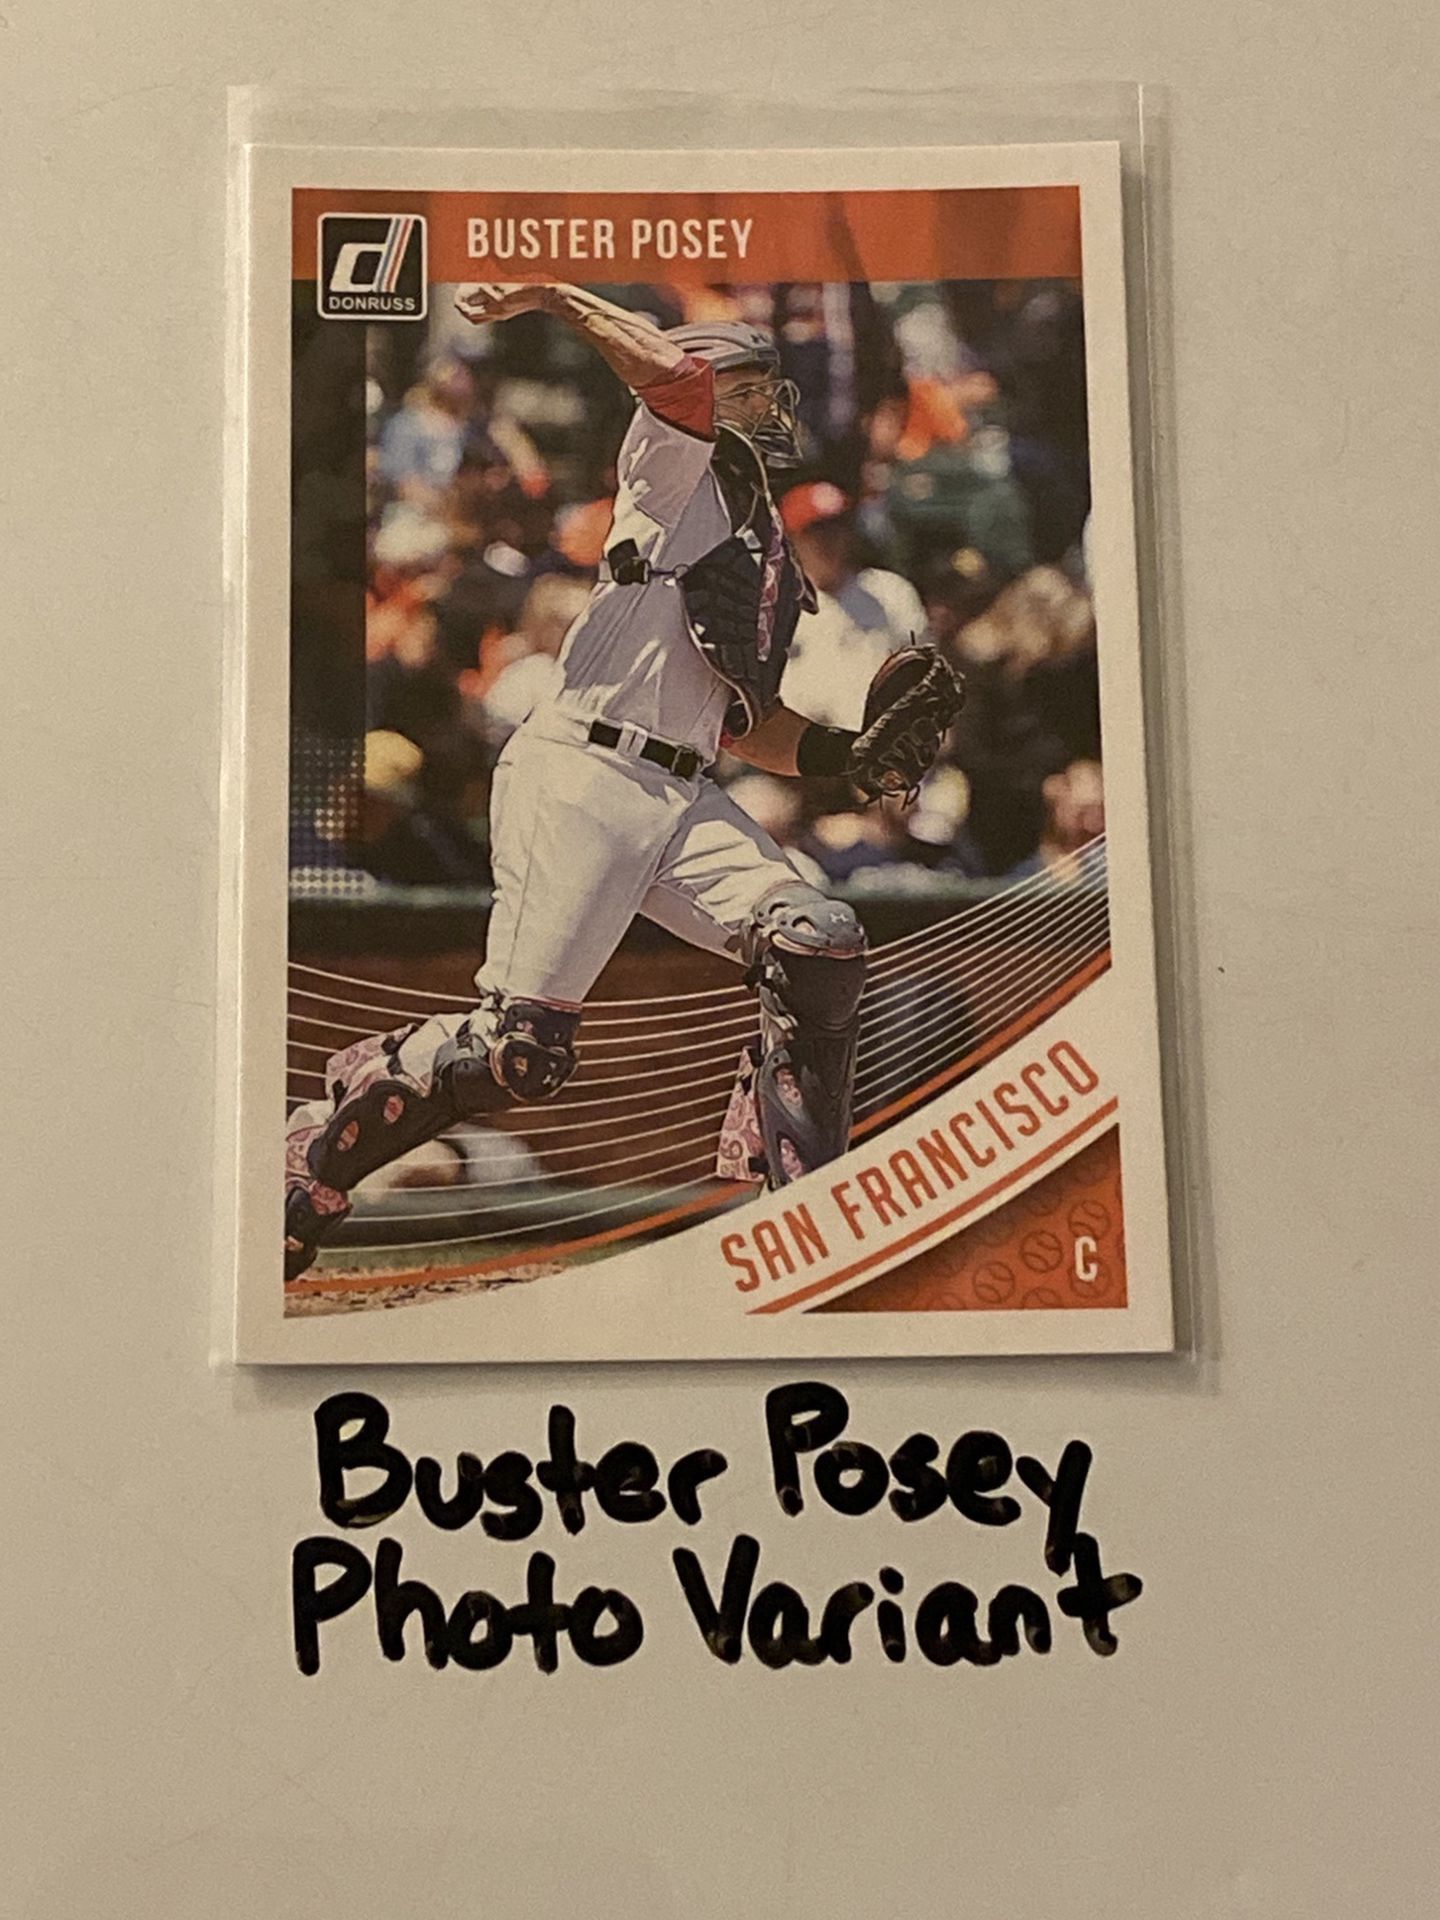 Buster Posey San Francisco Giants All Star Catcher Short Print Photo Variant Insert Card.